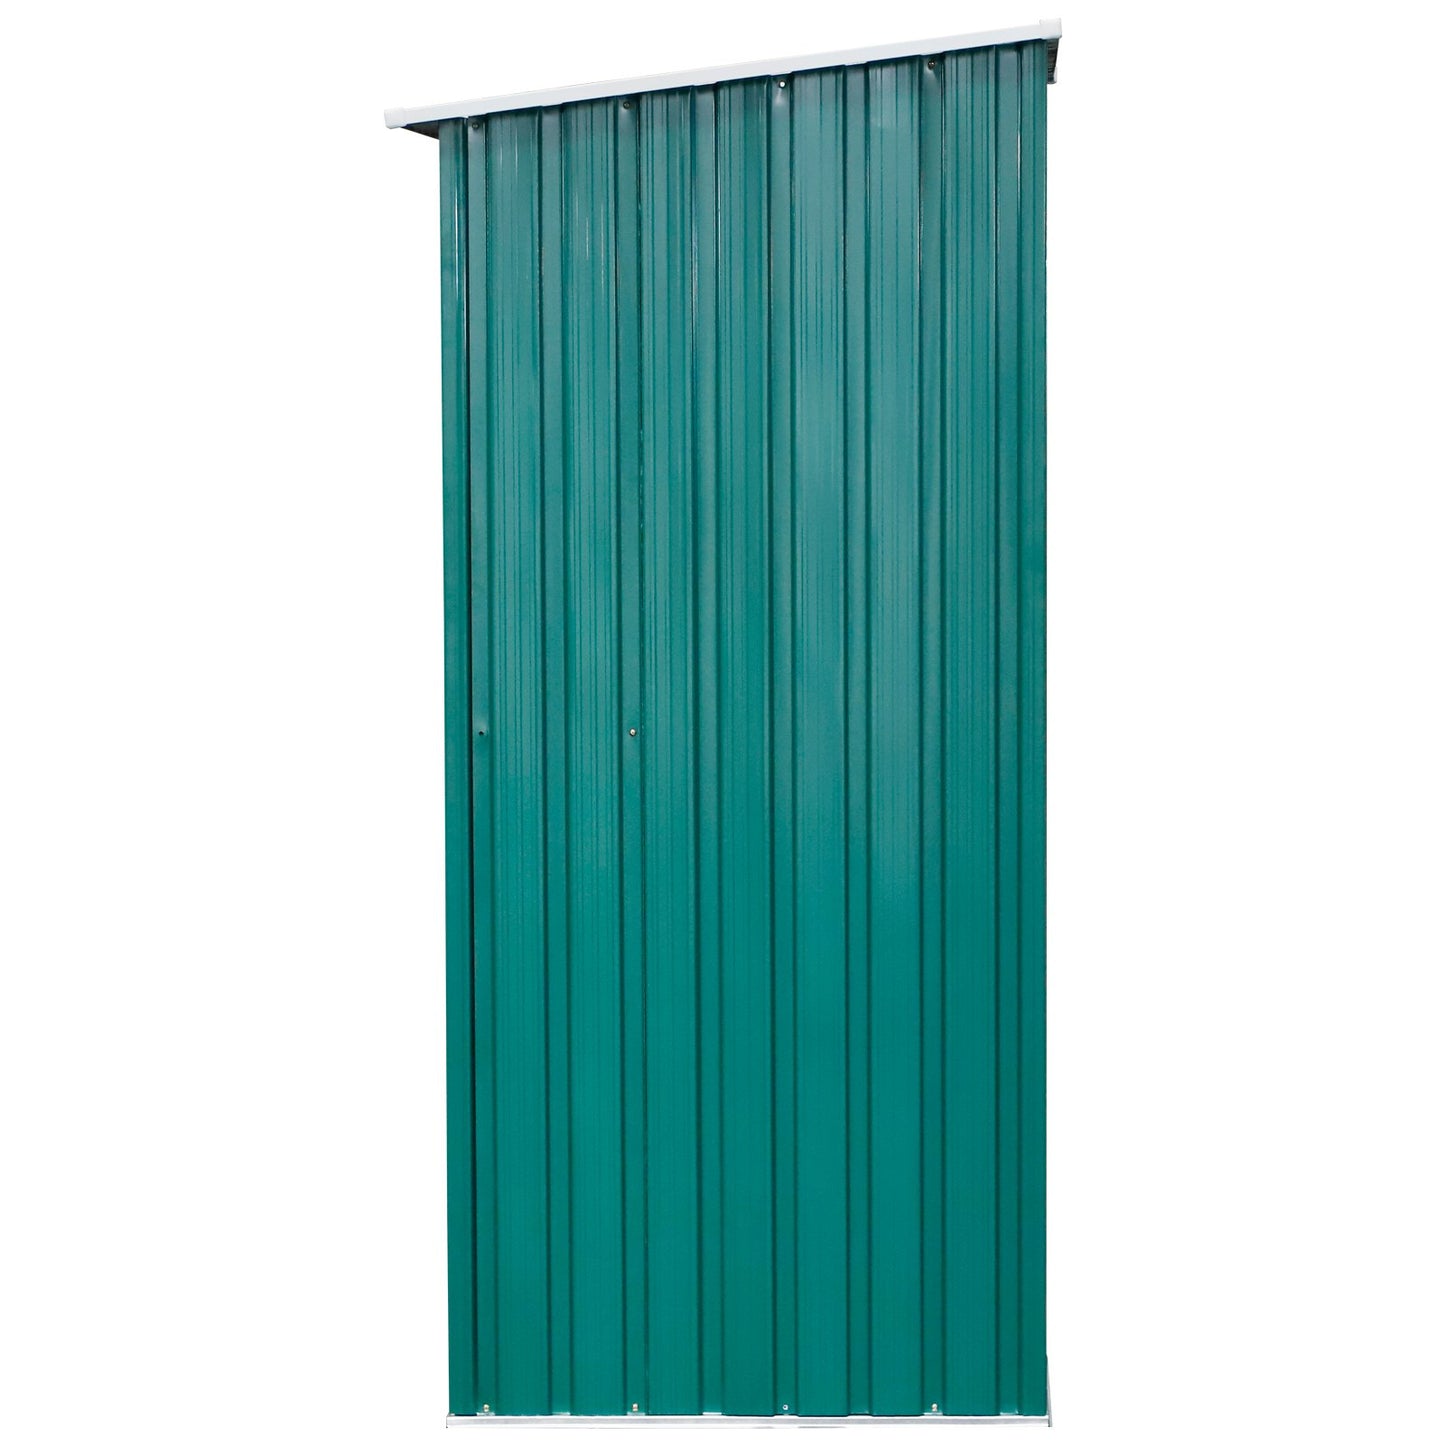 Outsunny 2.1 x 4.8ft Corrugated Steel Single Door Garden Shed - Green